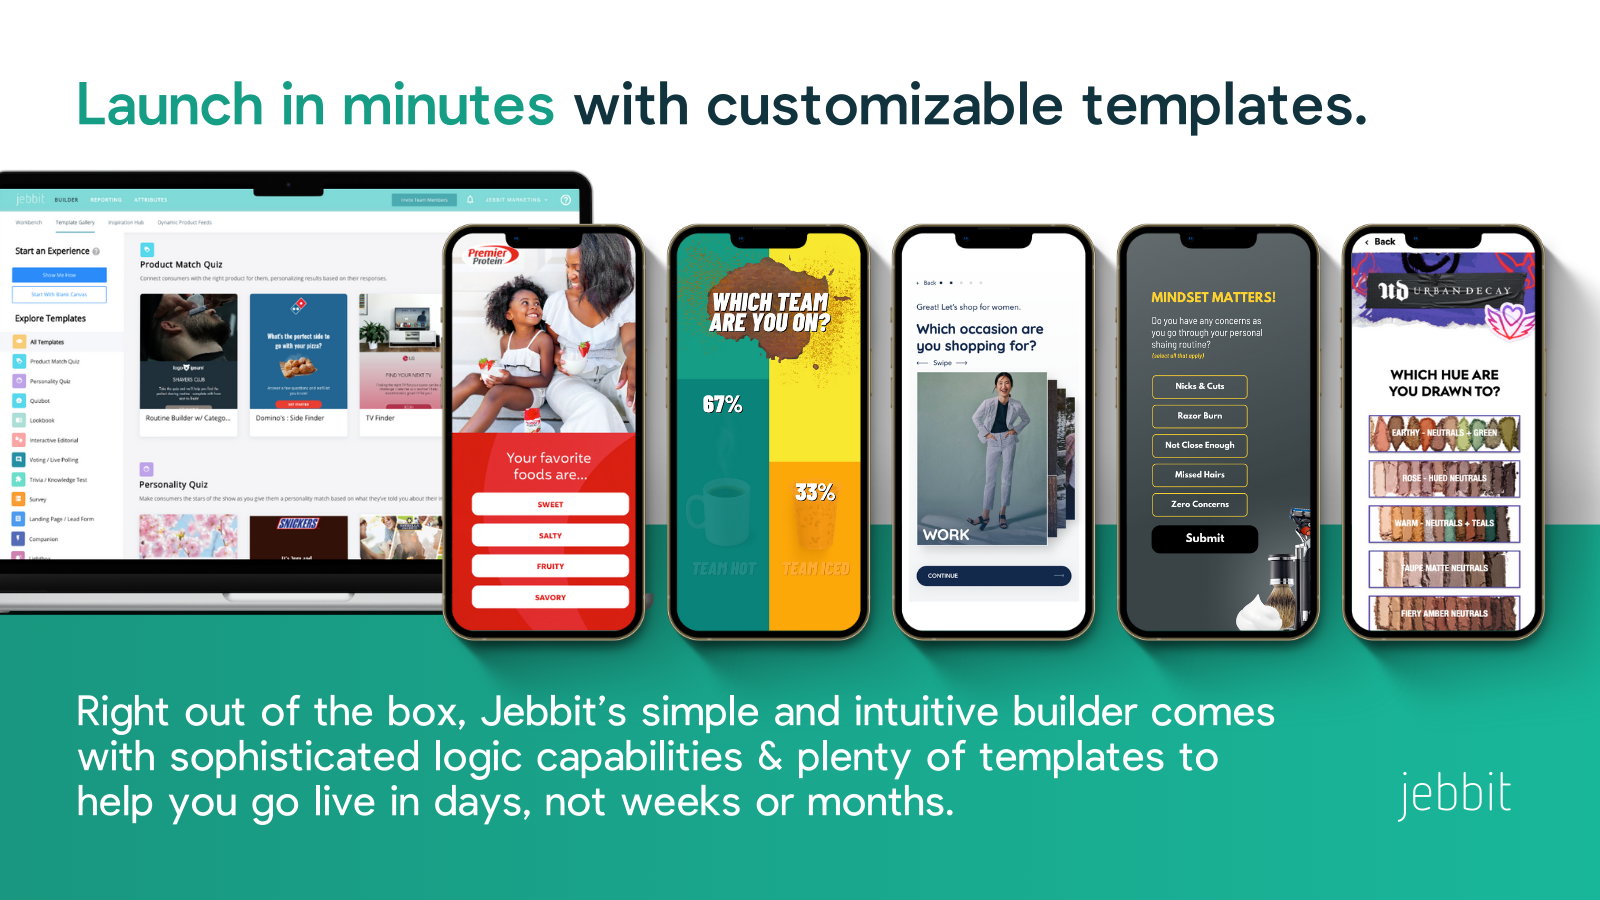 Out of the box customizable templates